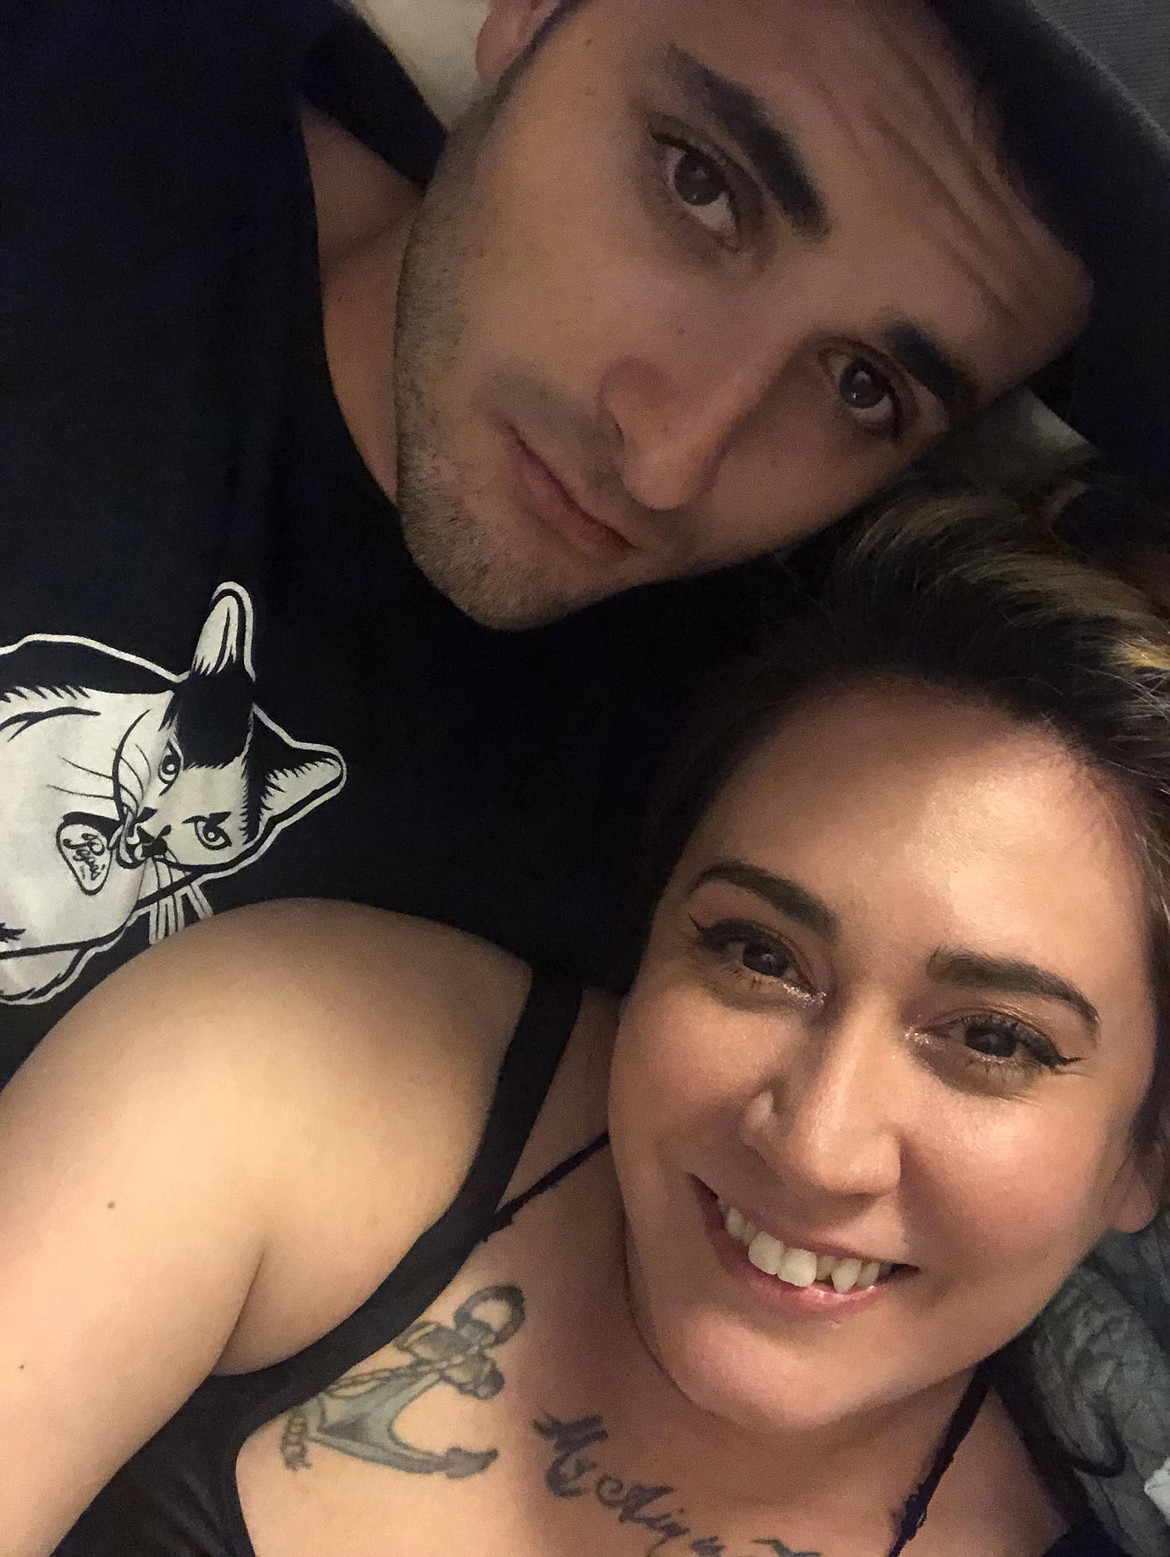 Flathead Valley comedian Vince Carr takes a photo with his fiancee, Cara Marquez. Carr died by suicide in November 2020. (Courtesy photo)